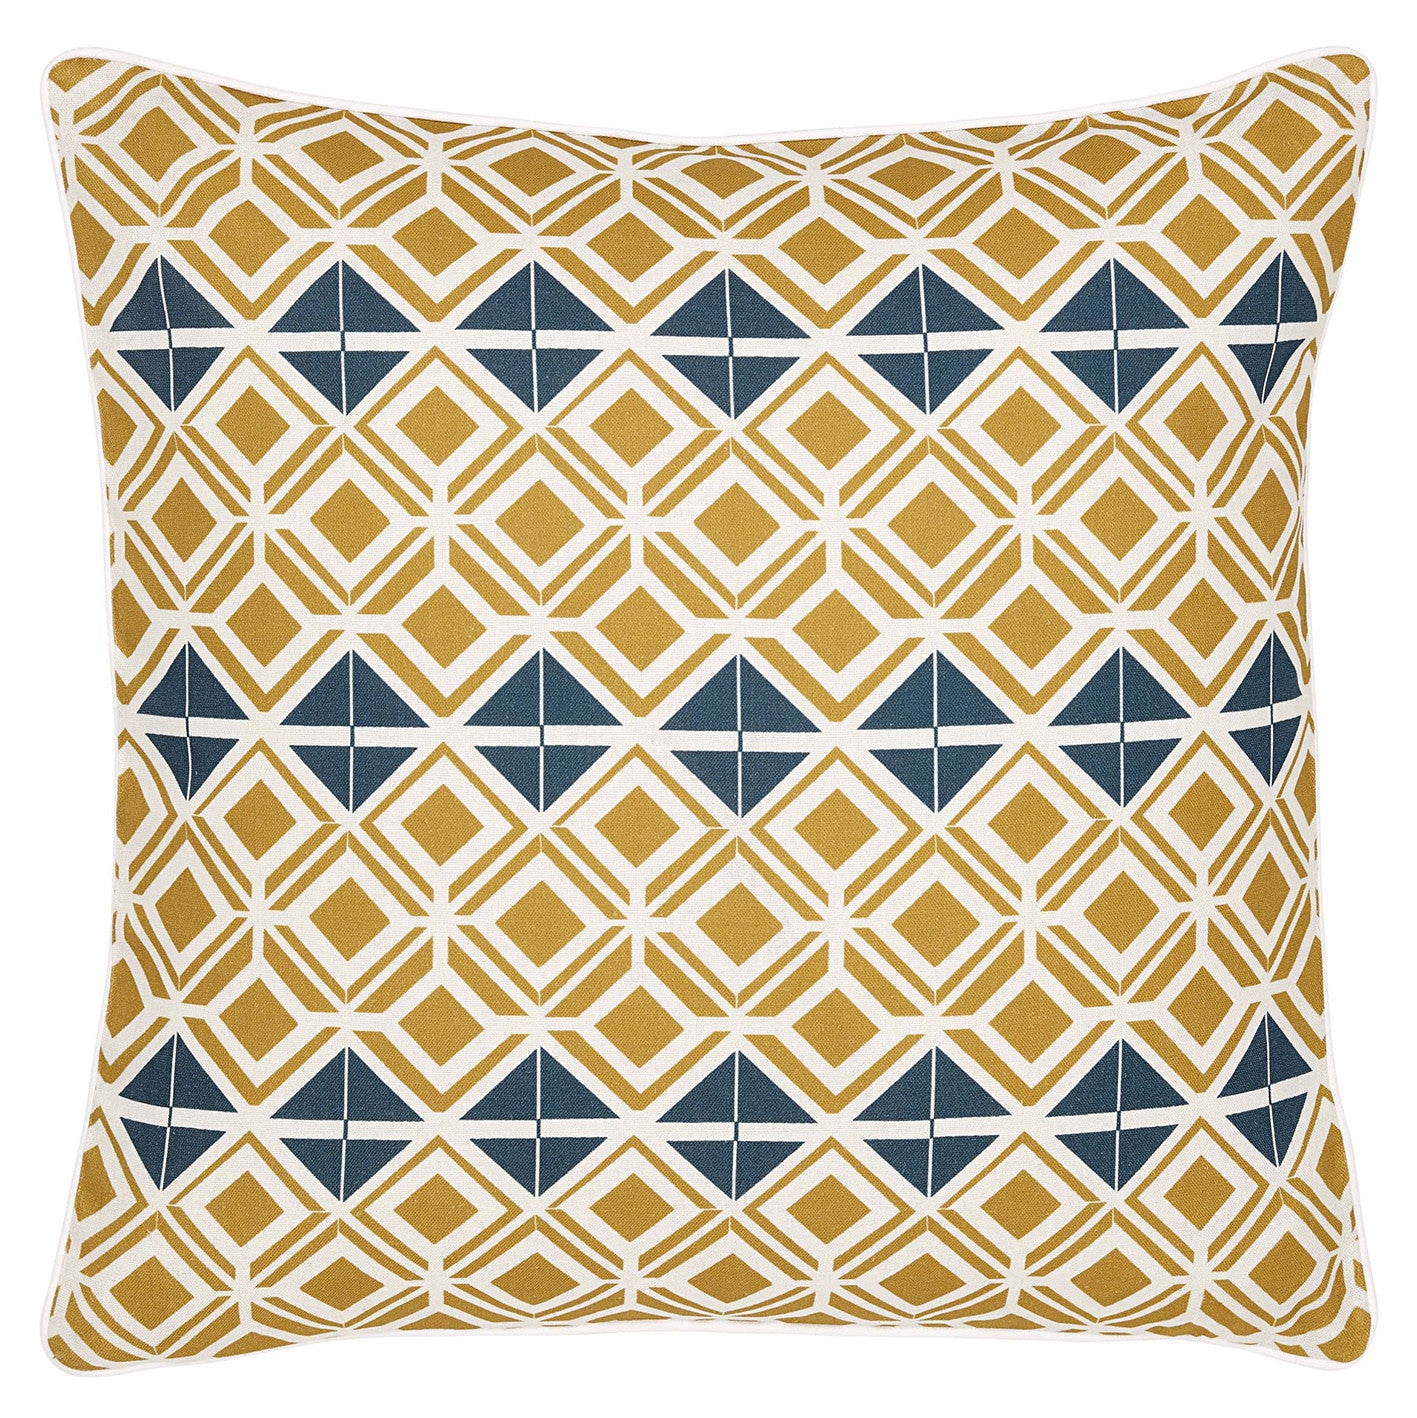 Glasswork Geometric Linen Decorative Throw Pillow in Gold and Dark Petrol Blue ships from Canada including the USA